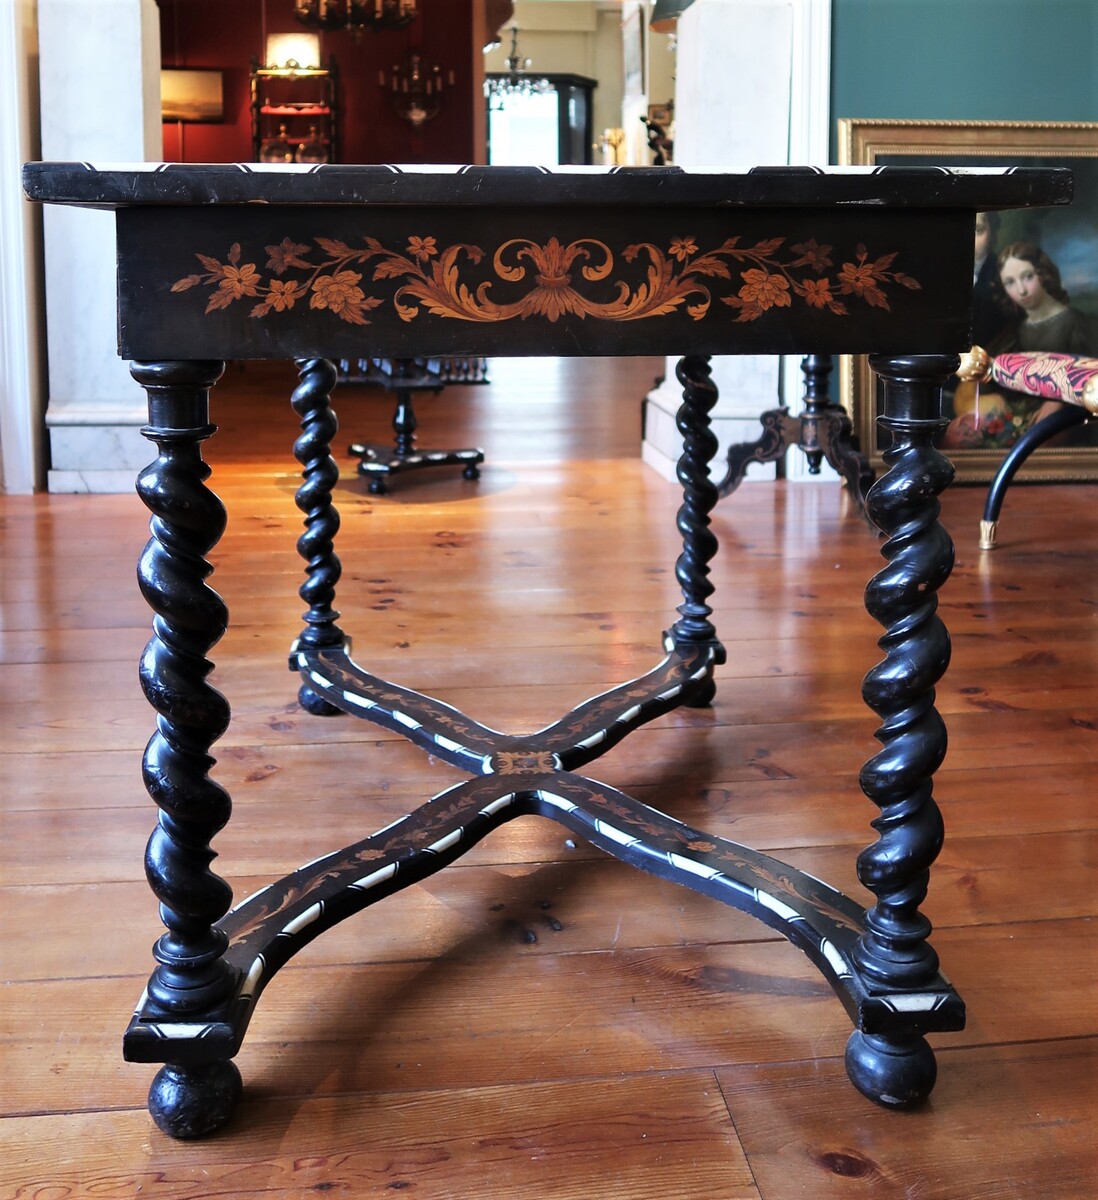 Dutch table with marquetry decoration